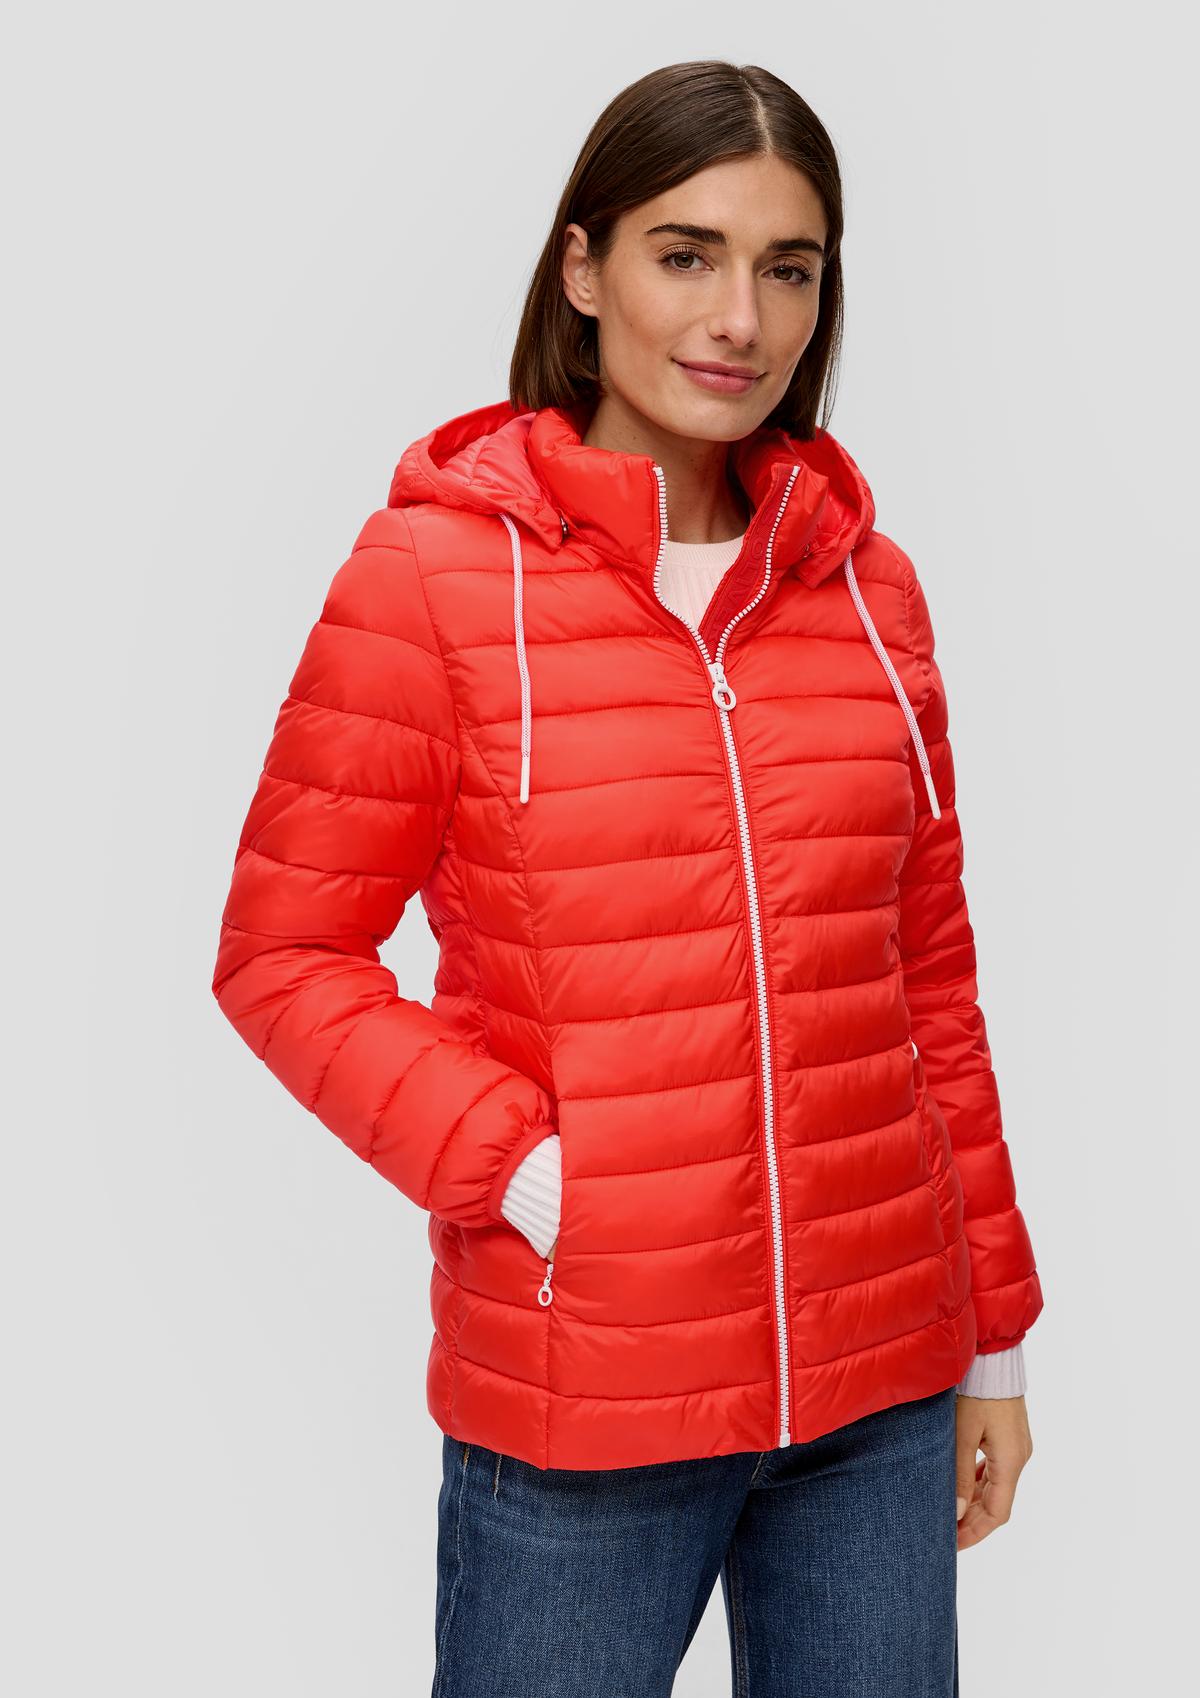 Lightweight quilted jacket with a detachable hood